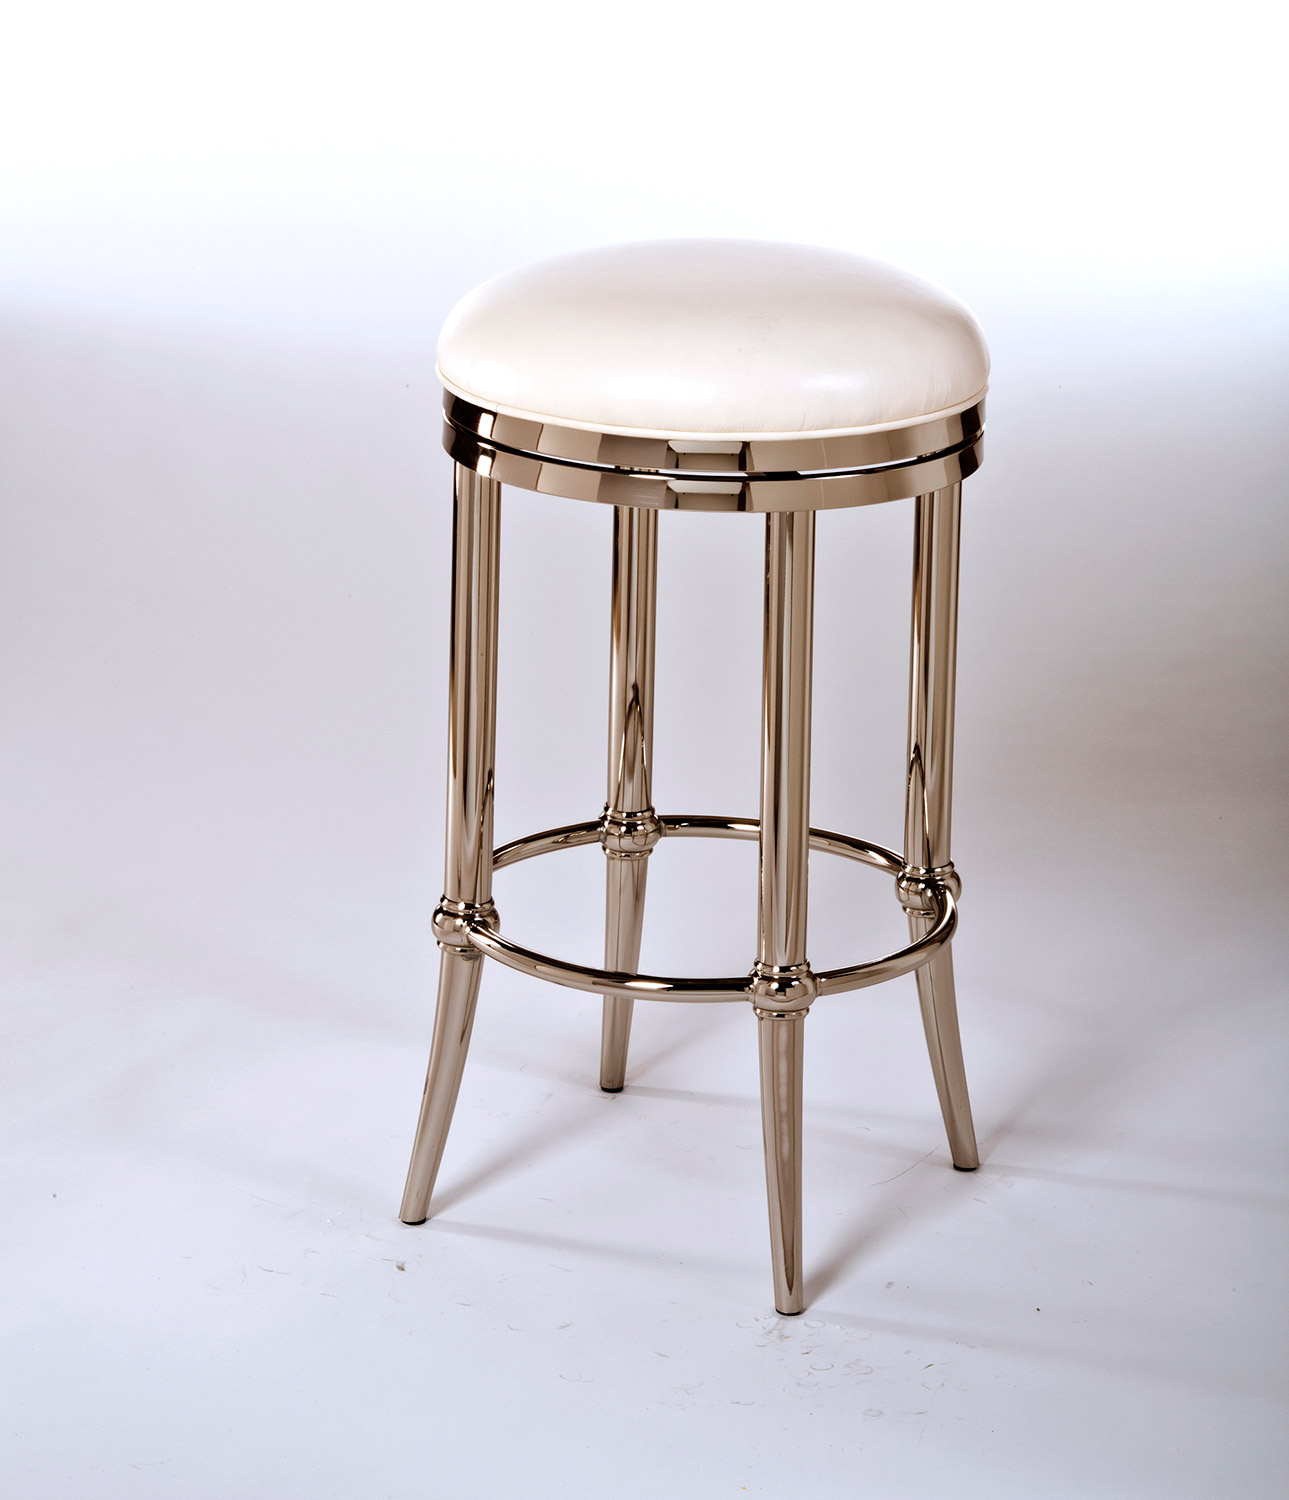 Hillsdale Cadman Backless Counter Stool - Shiny Nickel/Ivory PU